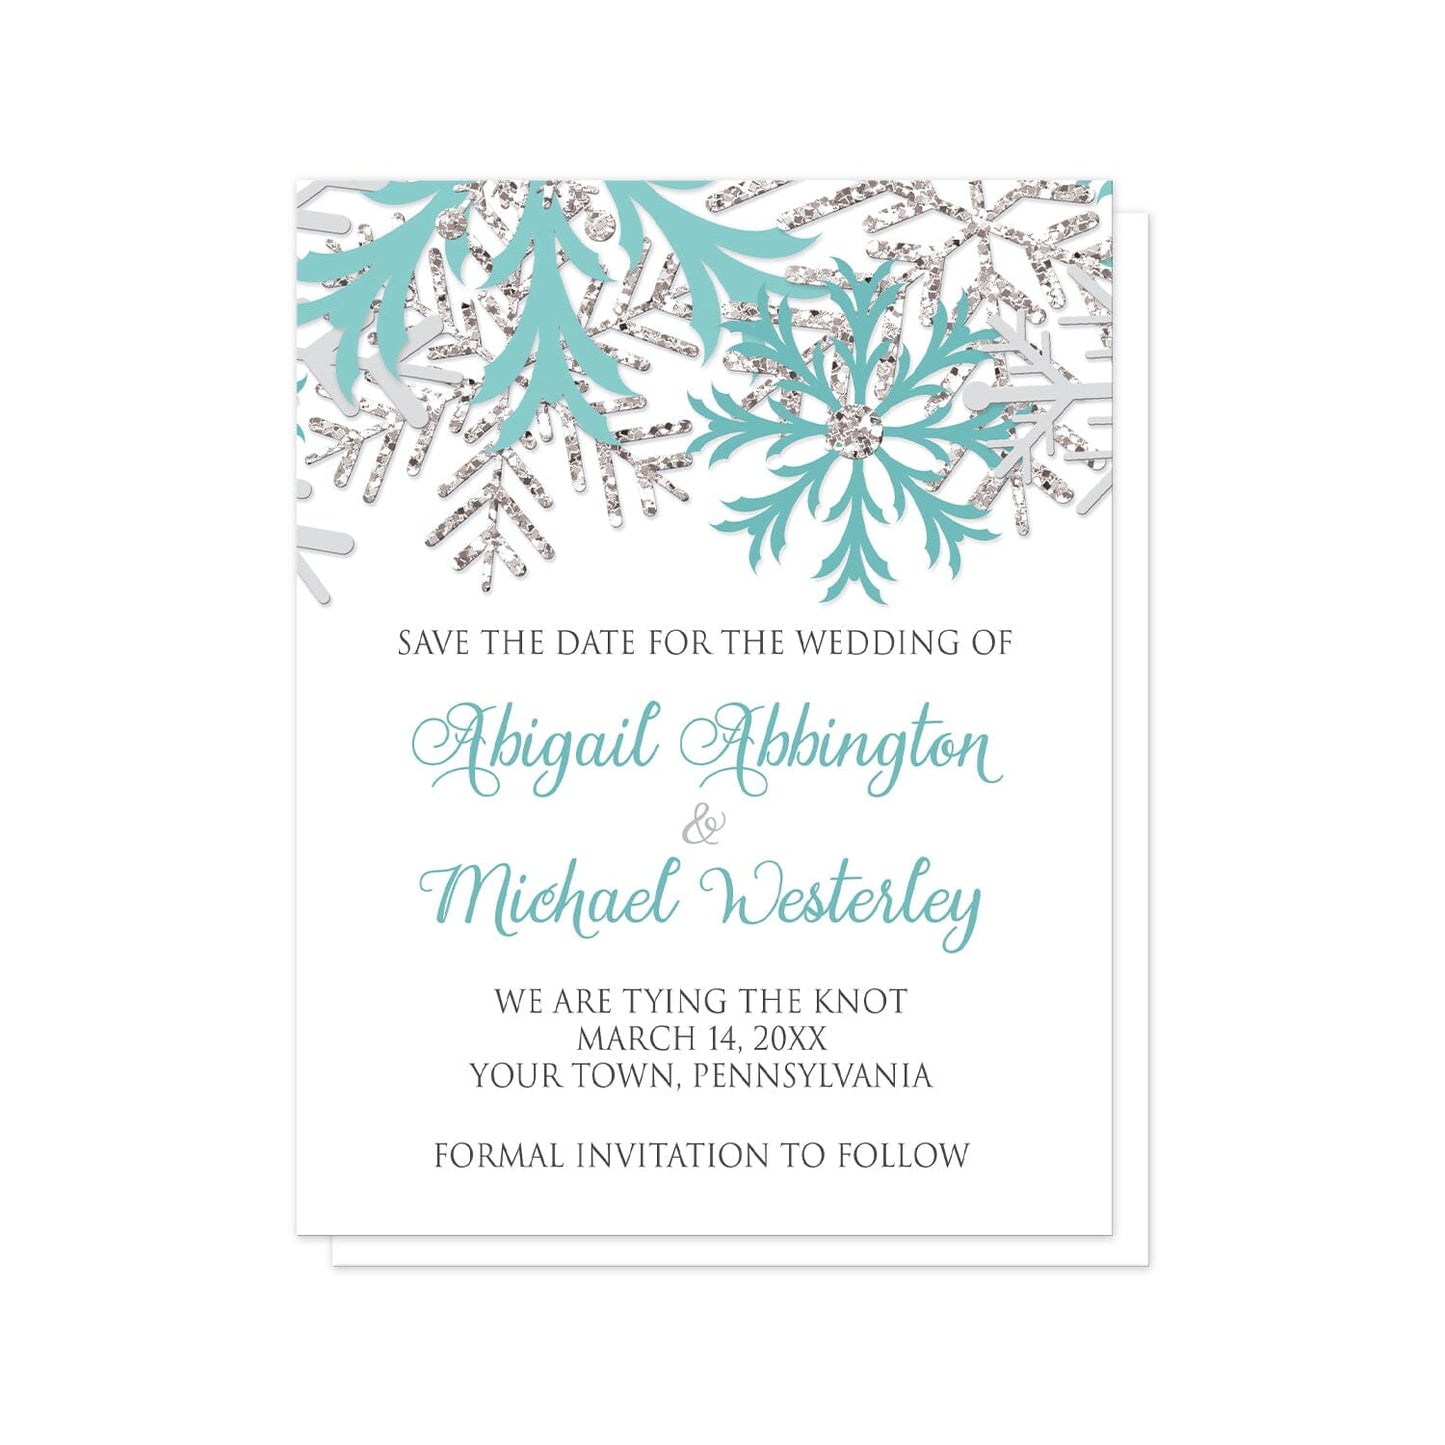 Winter Teal Silver Snowflake Save the Date Cards at Artistically Invited. Beautiful winter teal silver snowflake save the date cards designed with teal, light teal, silver-colored glitter-illustrated, and light gray snowflakes along the top over a white background. Your personalized wedding date details are custom printed in teal and gray below the pretty snowflakes.